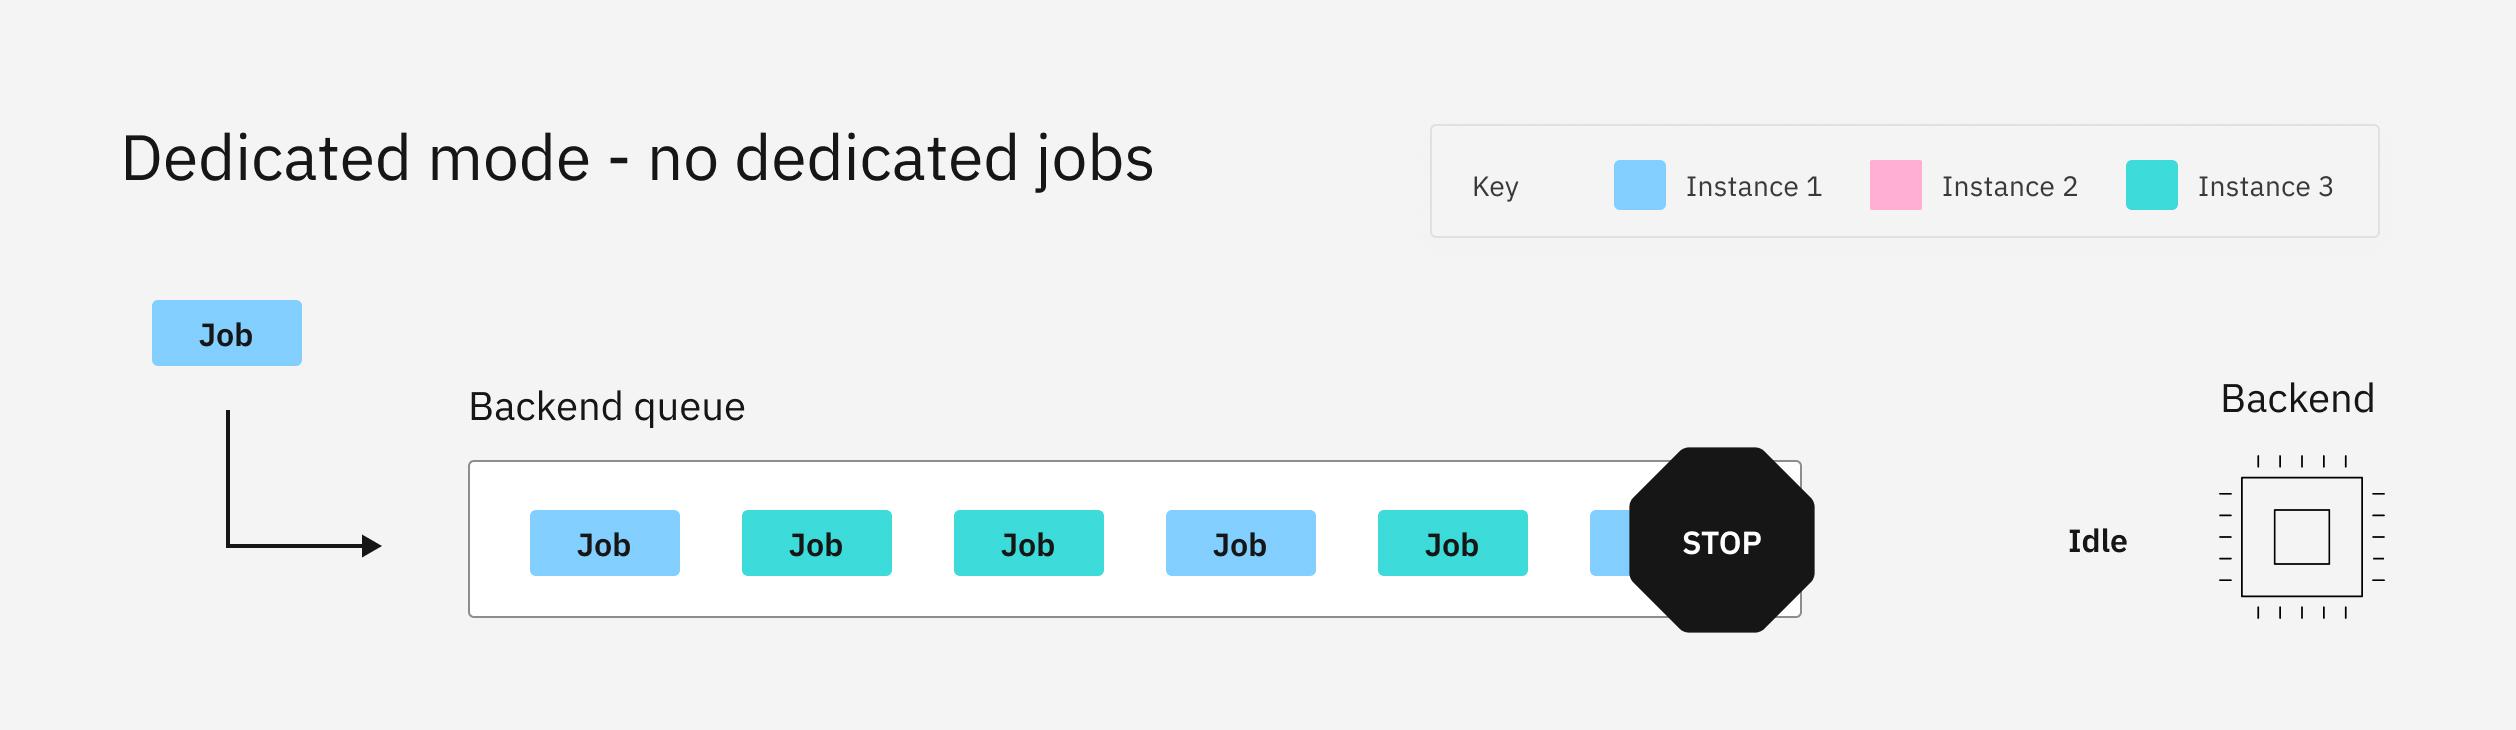 A job enters the queue and joins other jobs from various instances.  There are no jobs from Instance 2.  Because the backend is in dedicated mode for instance 2, no jobs are processed. All jobs wait in the normal queue.